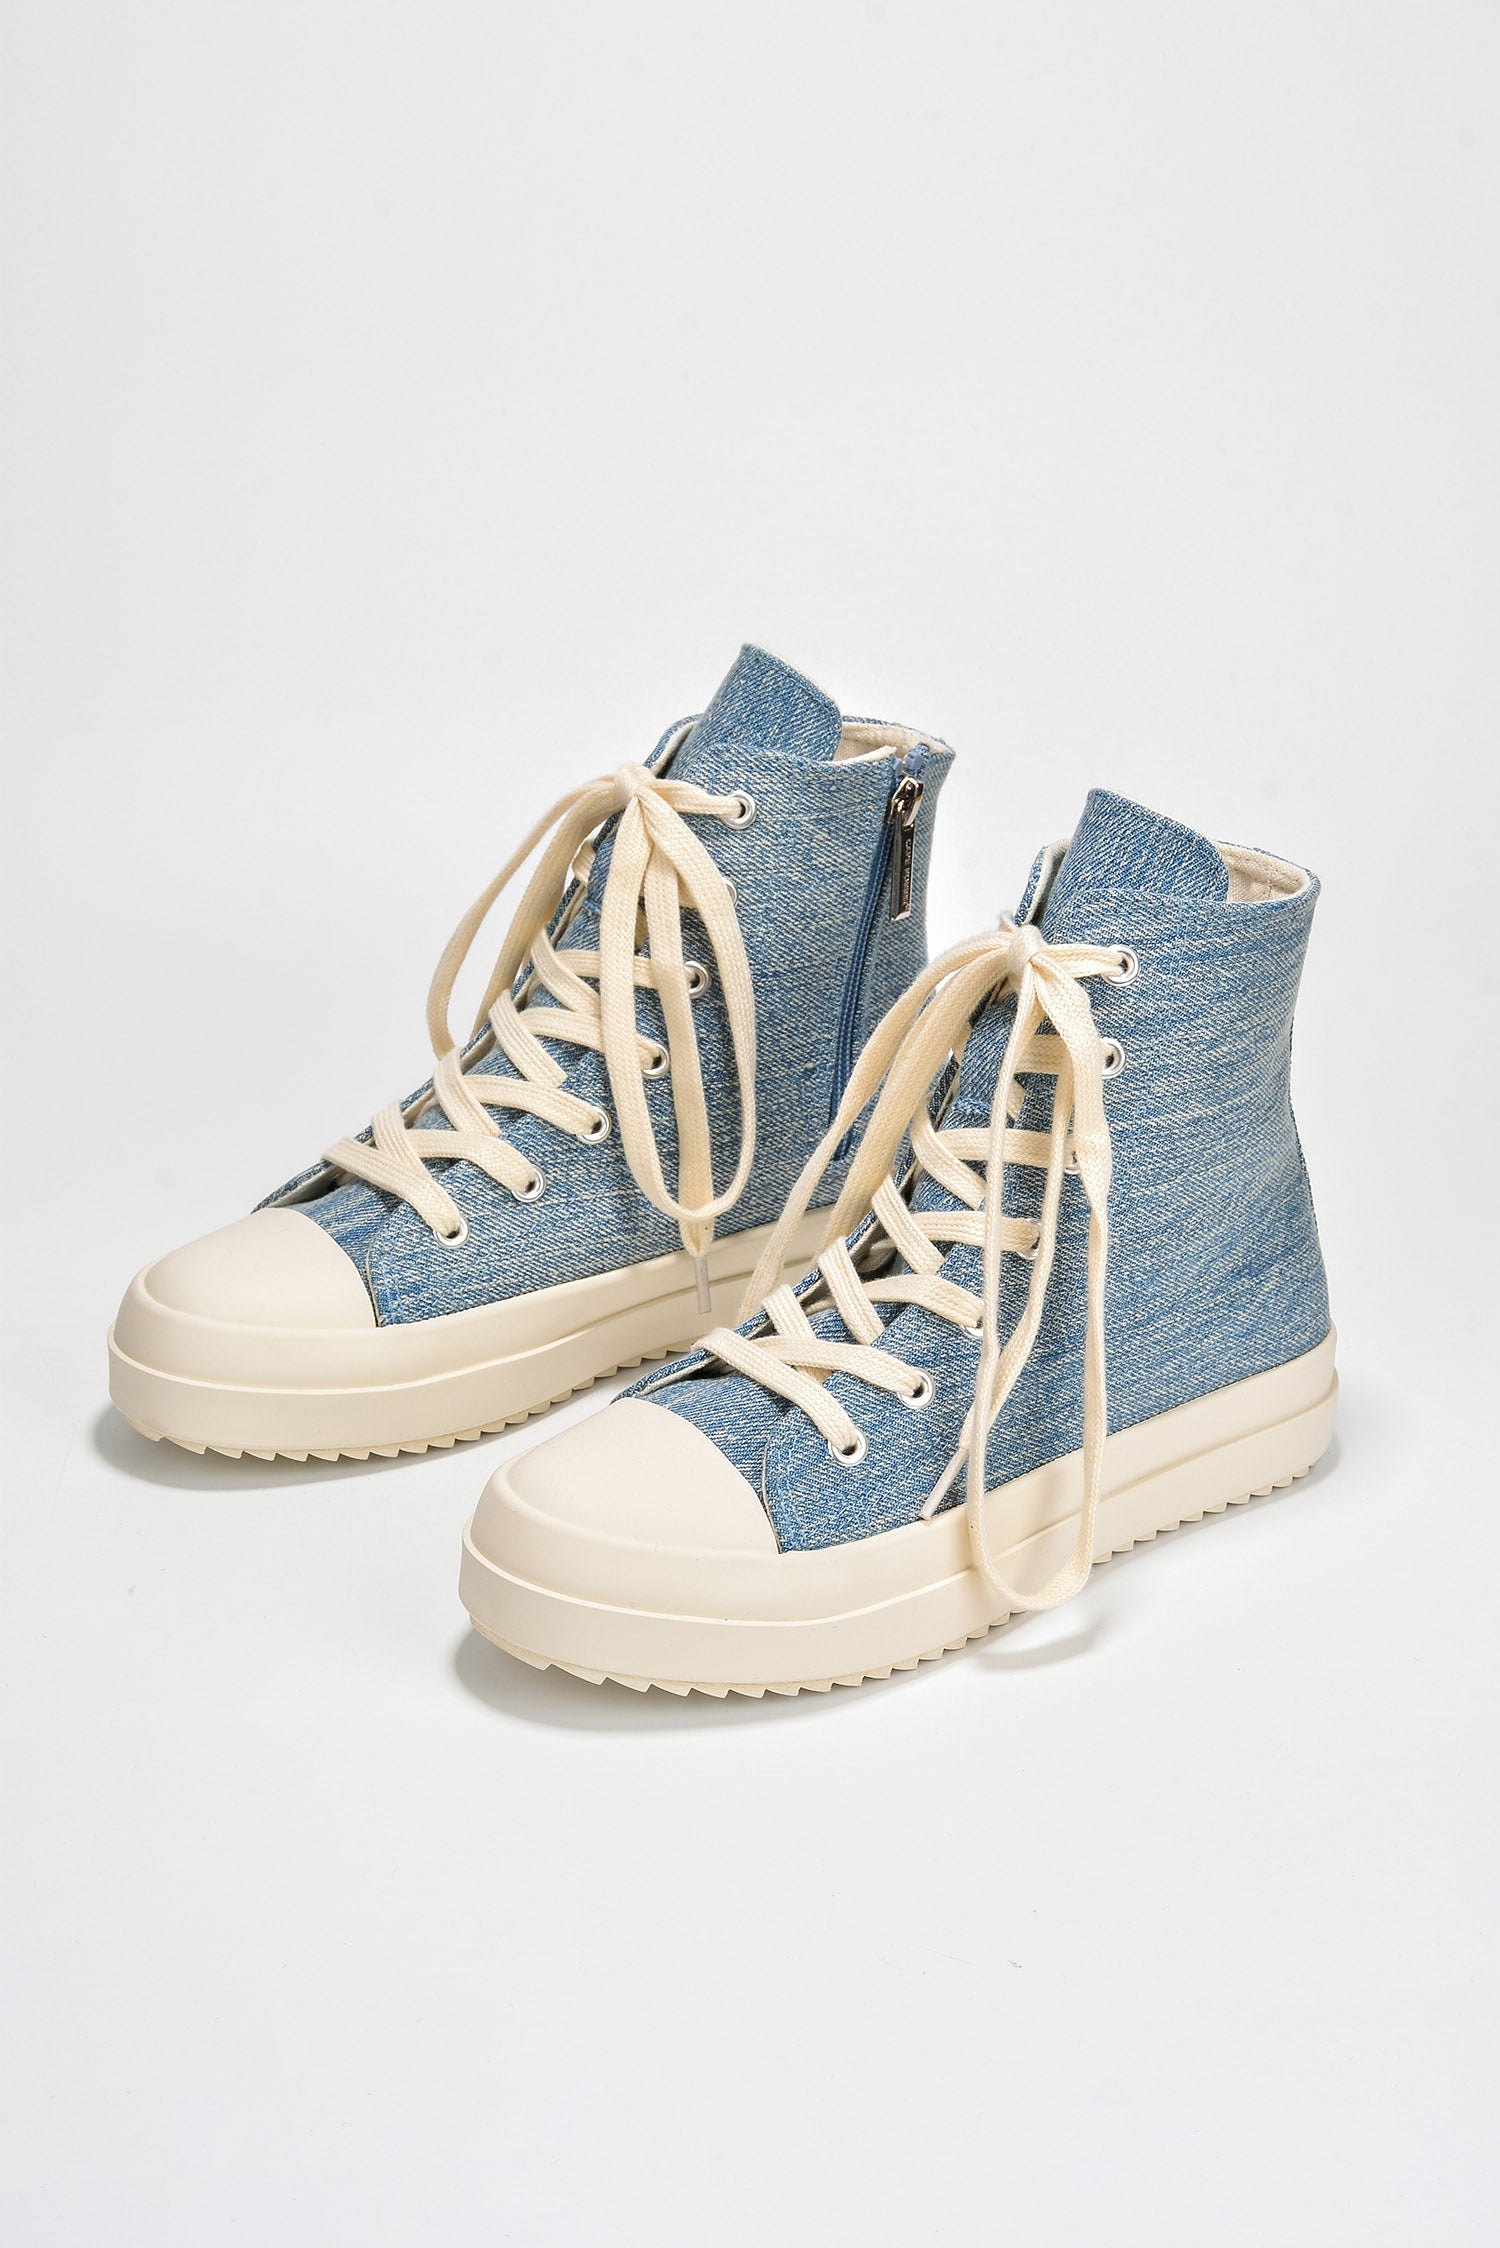 UrbanOG - Mania Lace Up High Top Lug Sole Sneakers - SNEAKERS